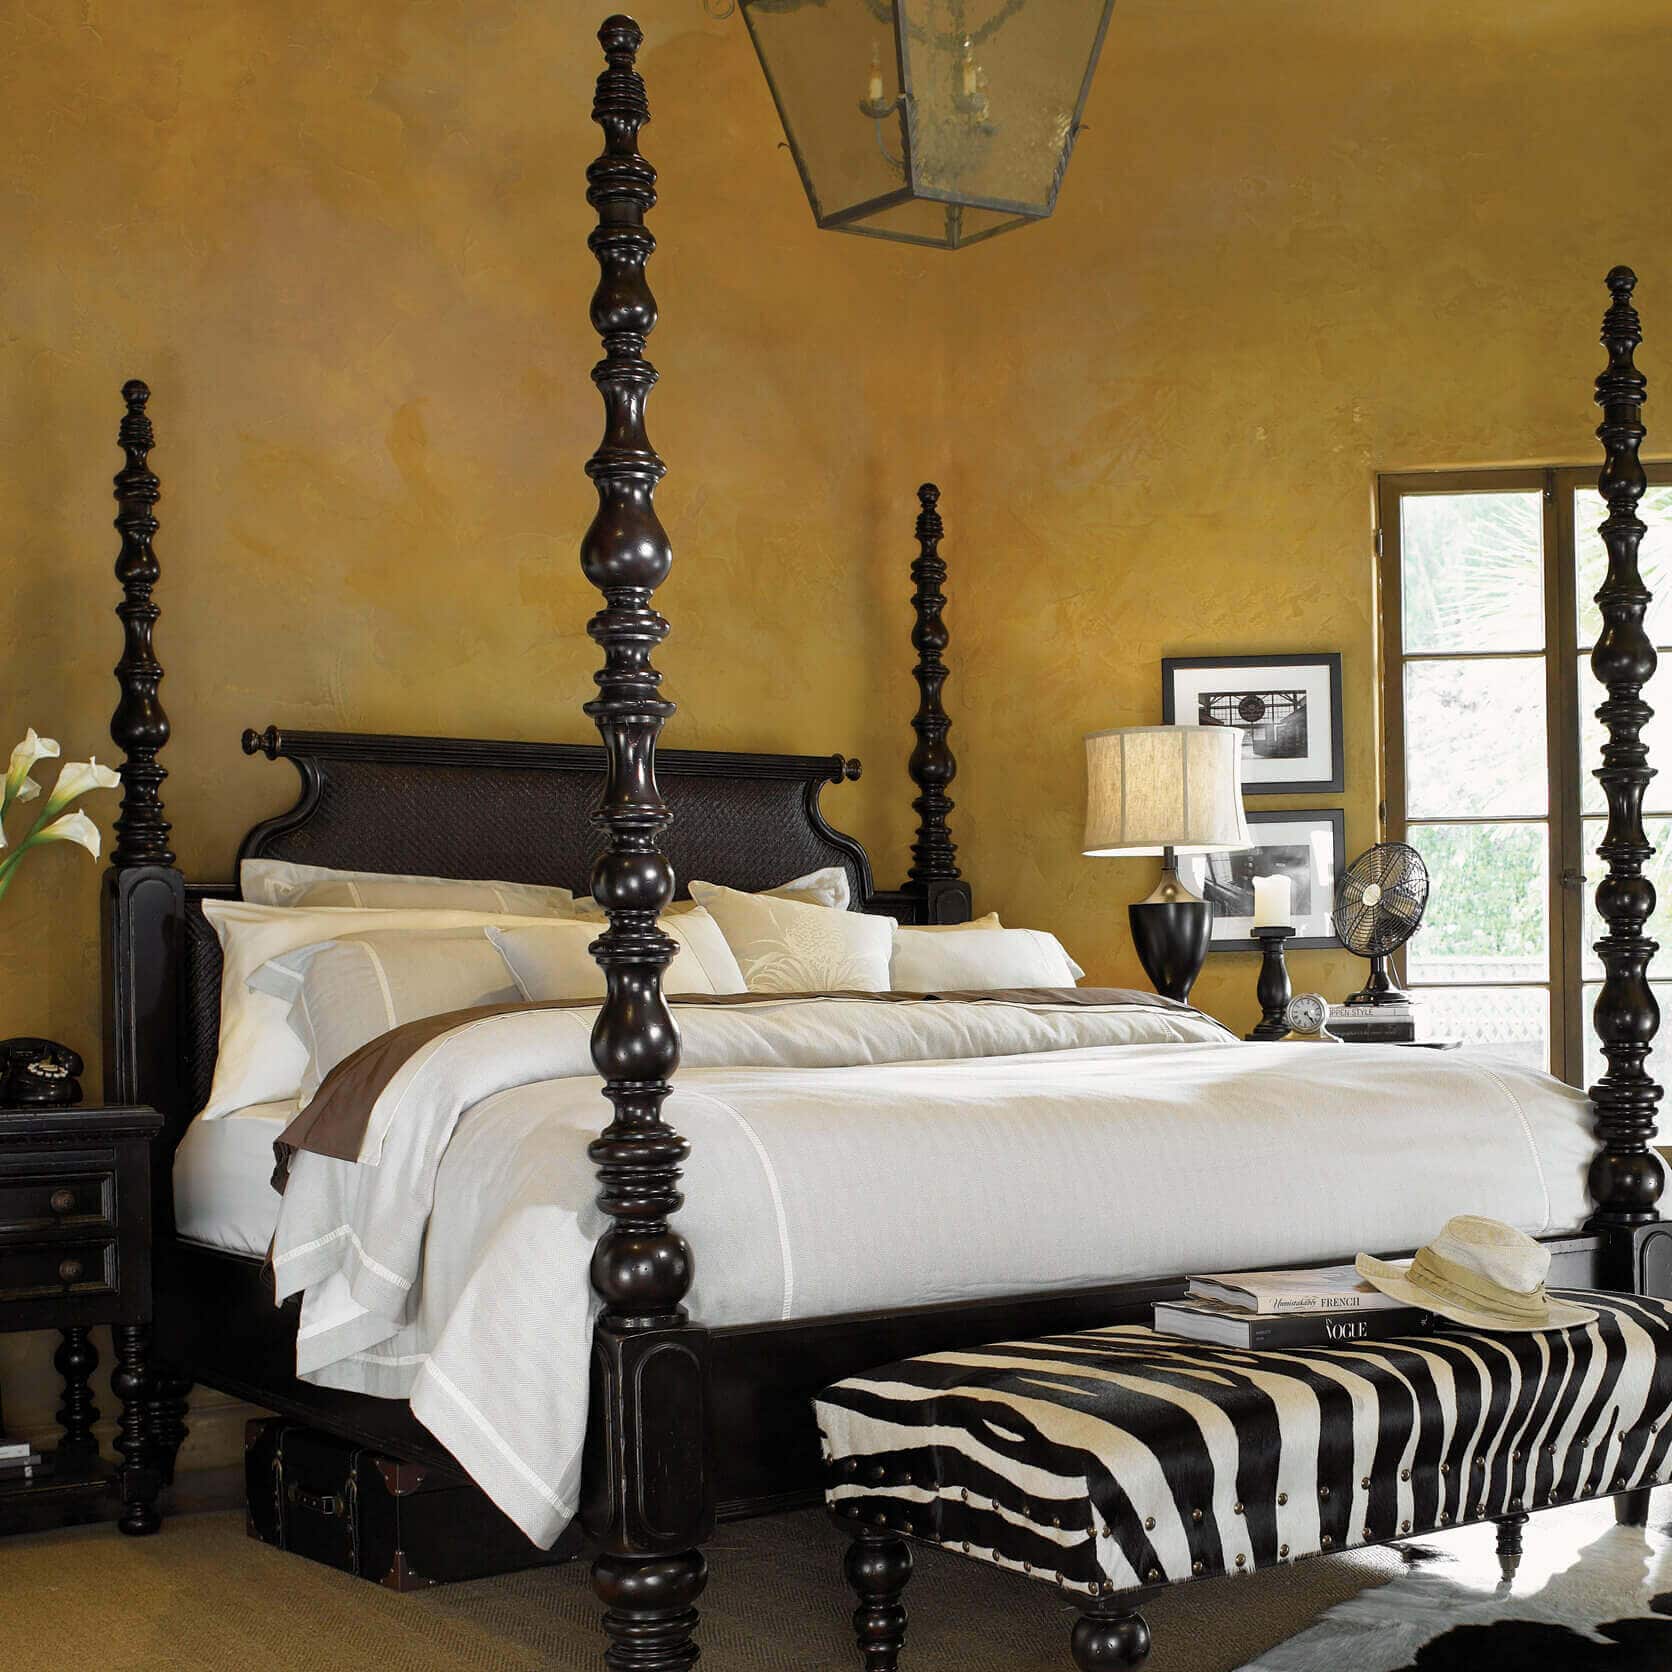 How To Build A Four Poster Bed - Image to u